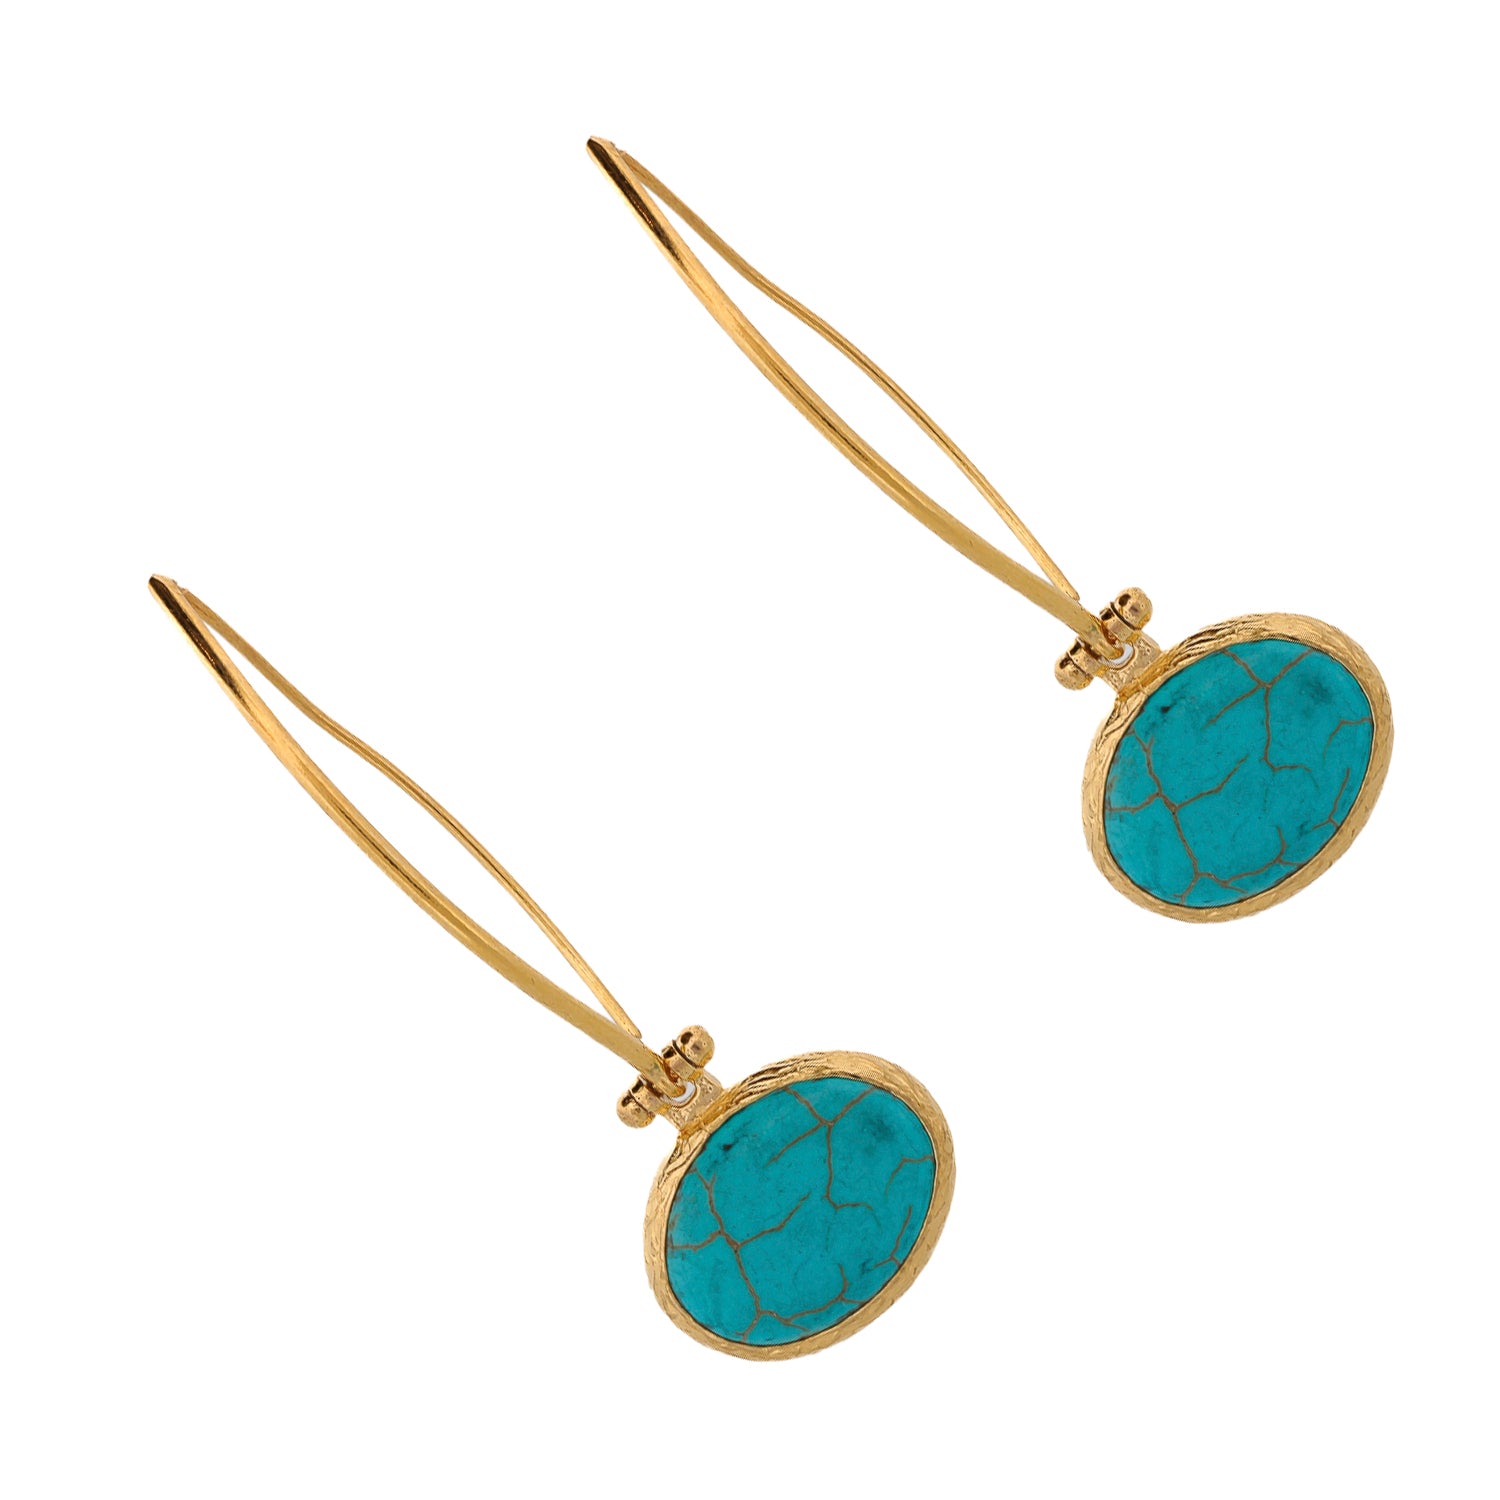 Luxurious Turquoise and Gold Dangle Earrings